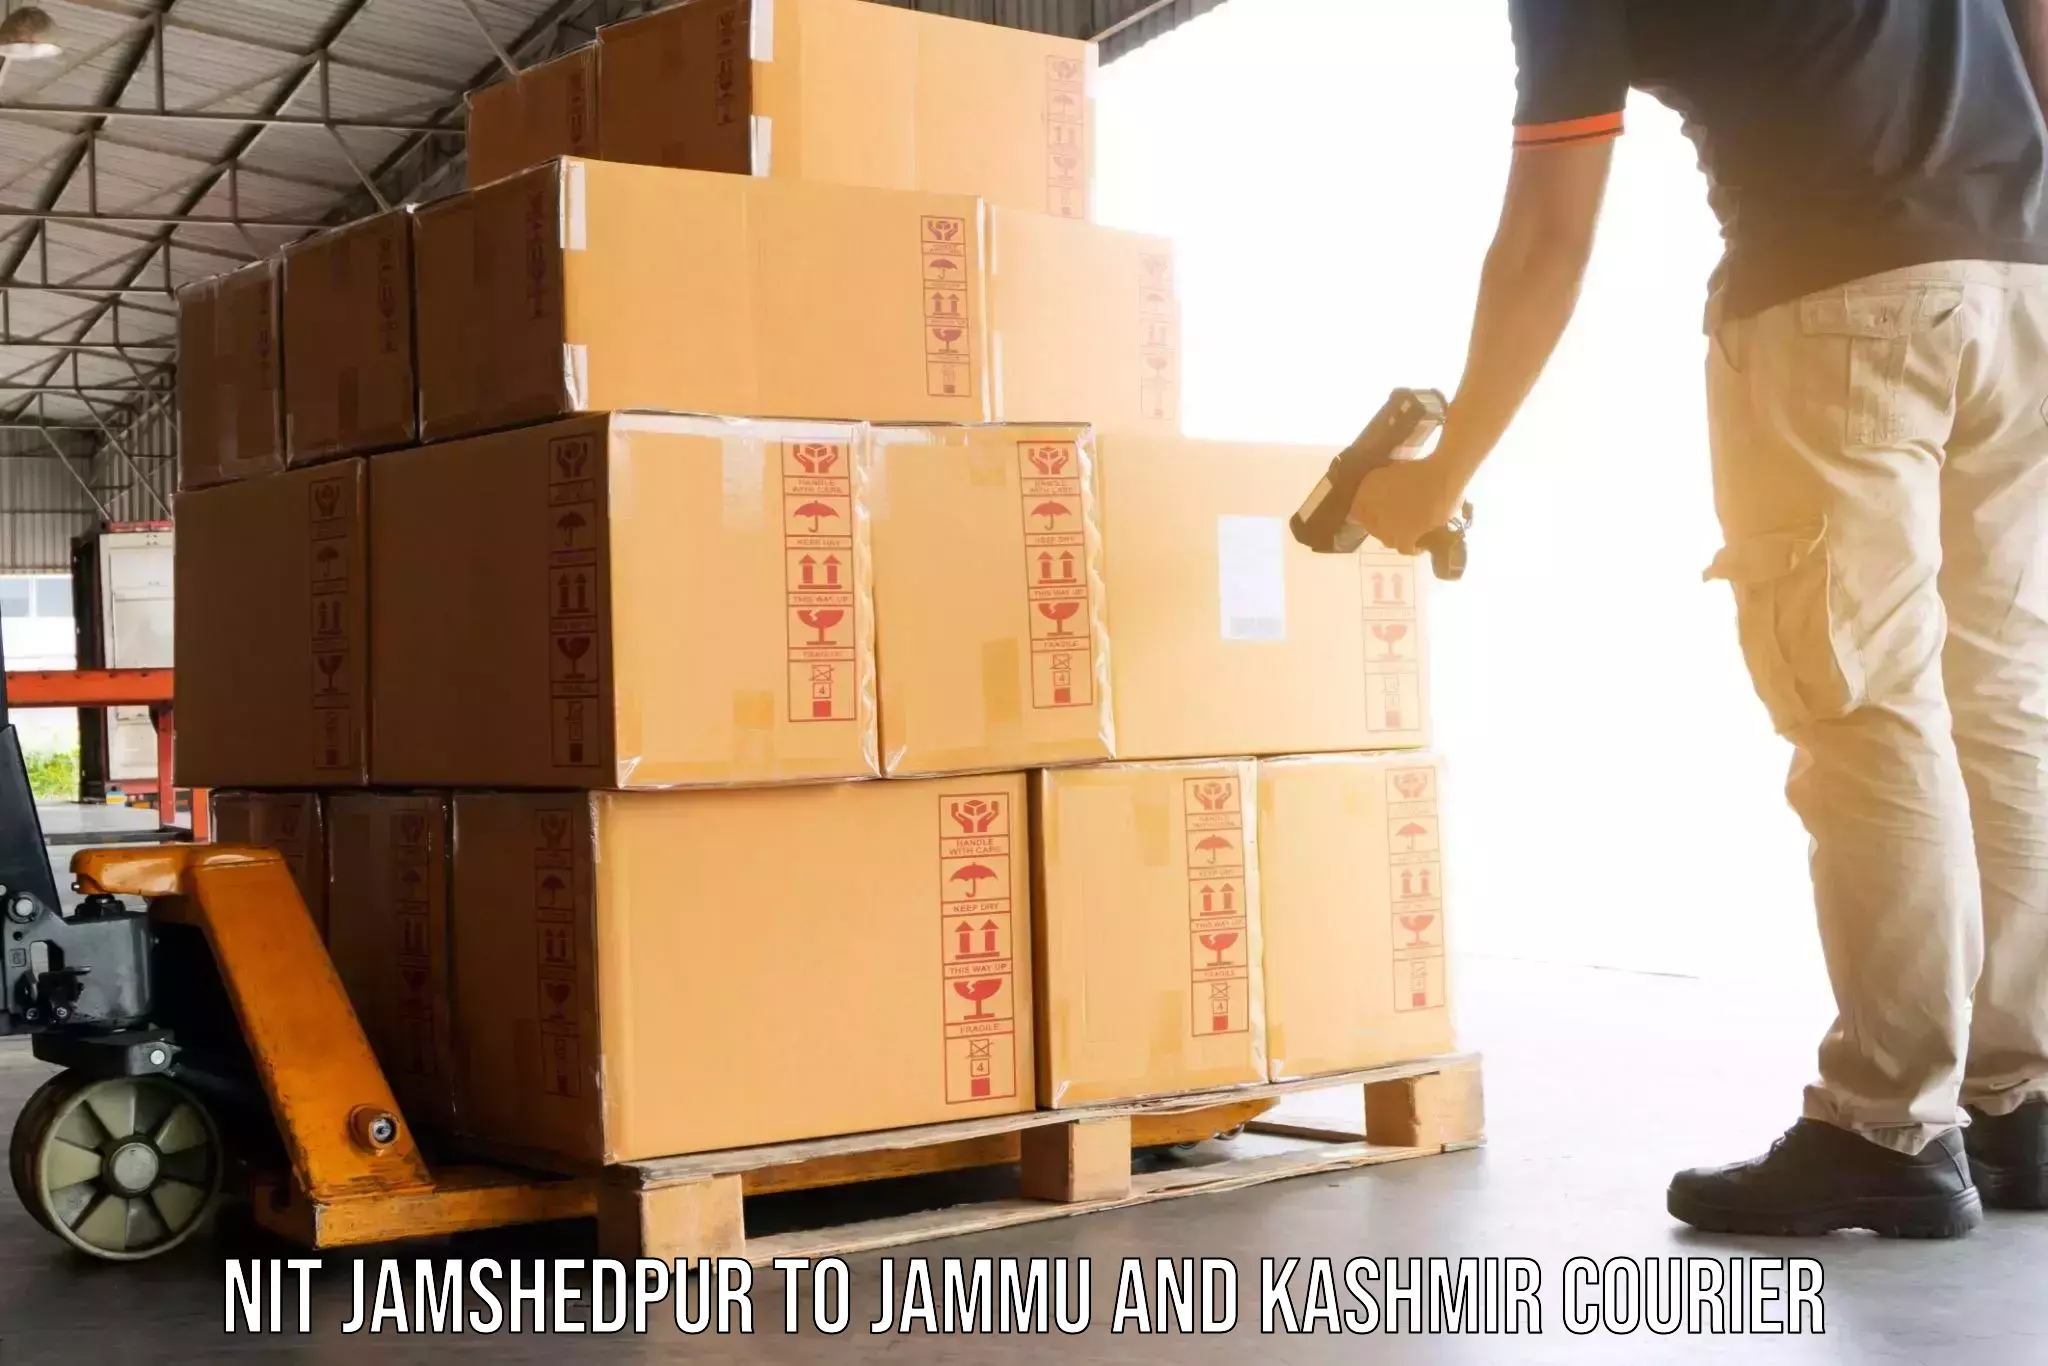 Hassle-free relocation NIT Jamshedpur to Bhaderwah